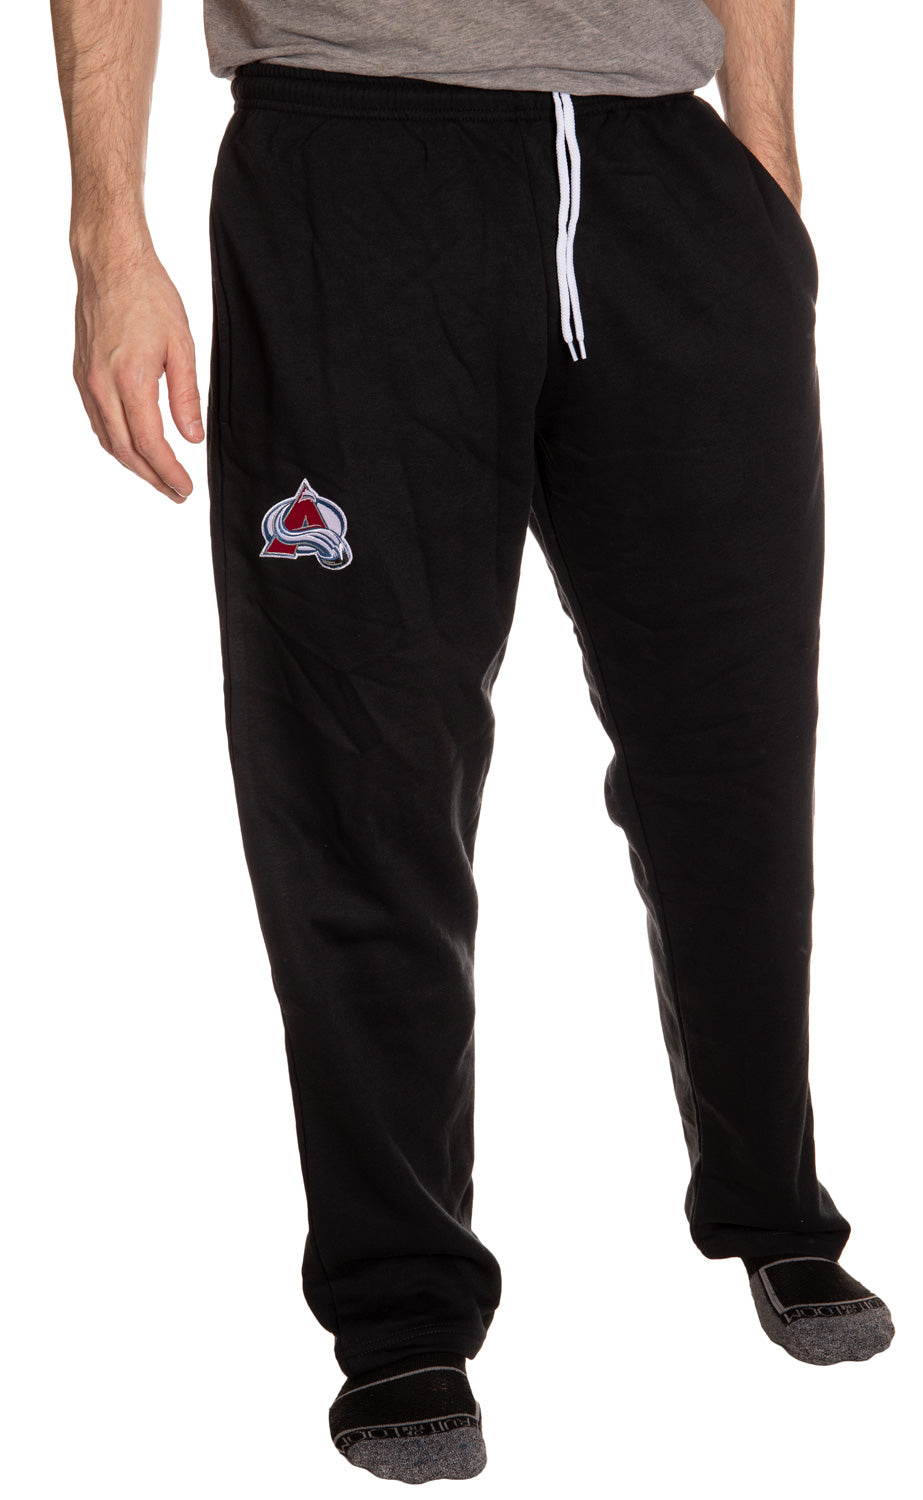 Colorado Avalanche Embroidered Logo Sweatpants for Men Front View, Hands in Side Pockets.